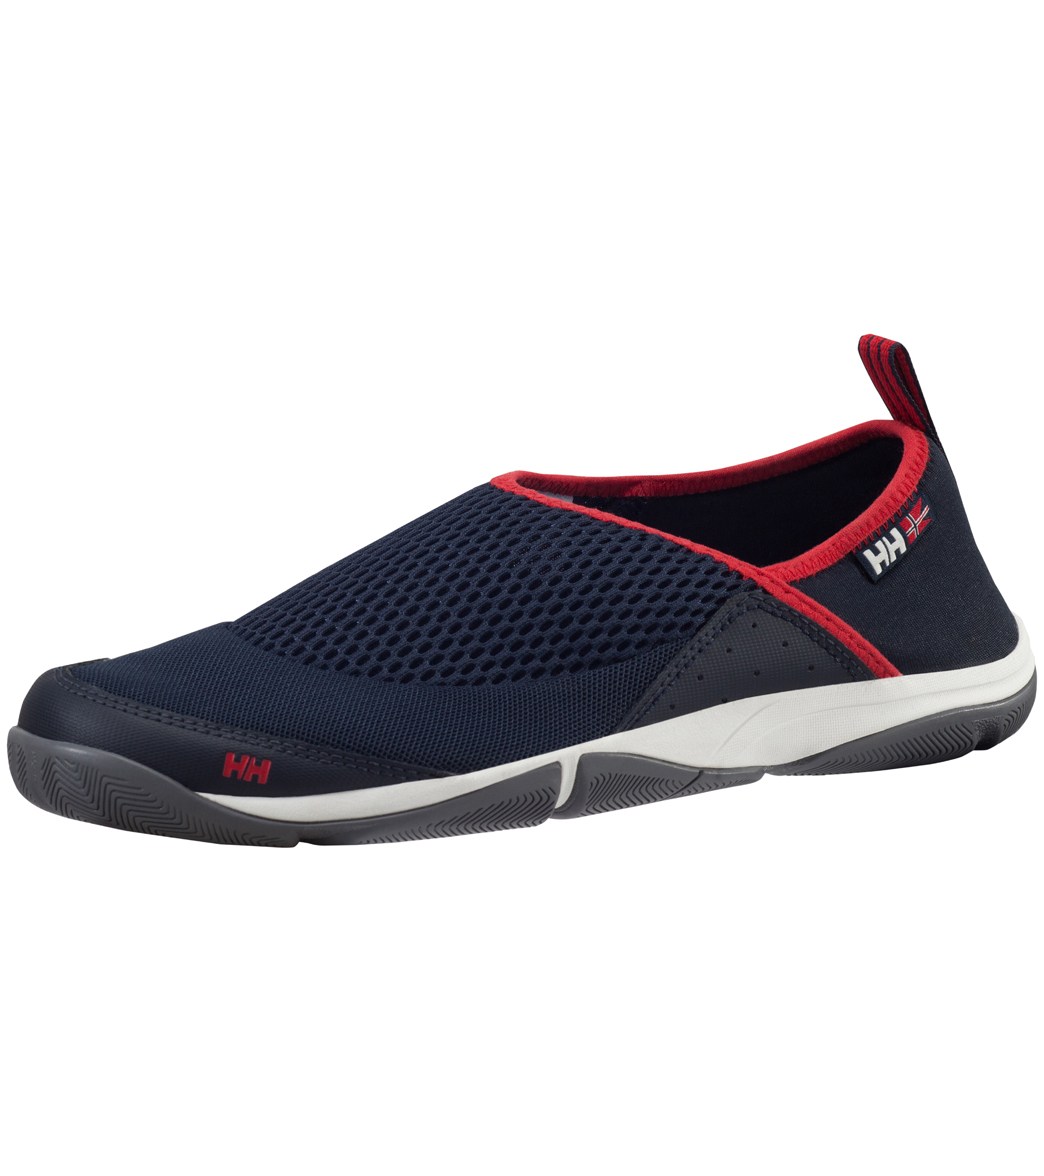 Helly Hansen Men's Watermoc 2 Water Shoes at SwimOutlet.com - Free Shipping